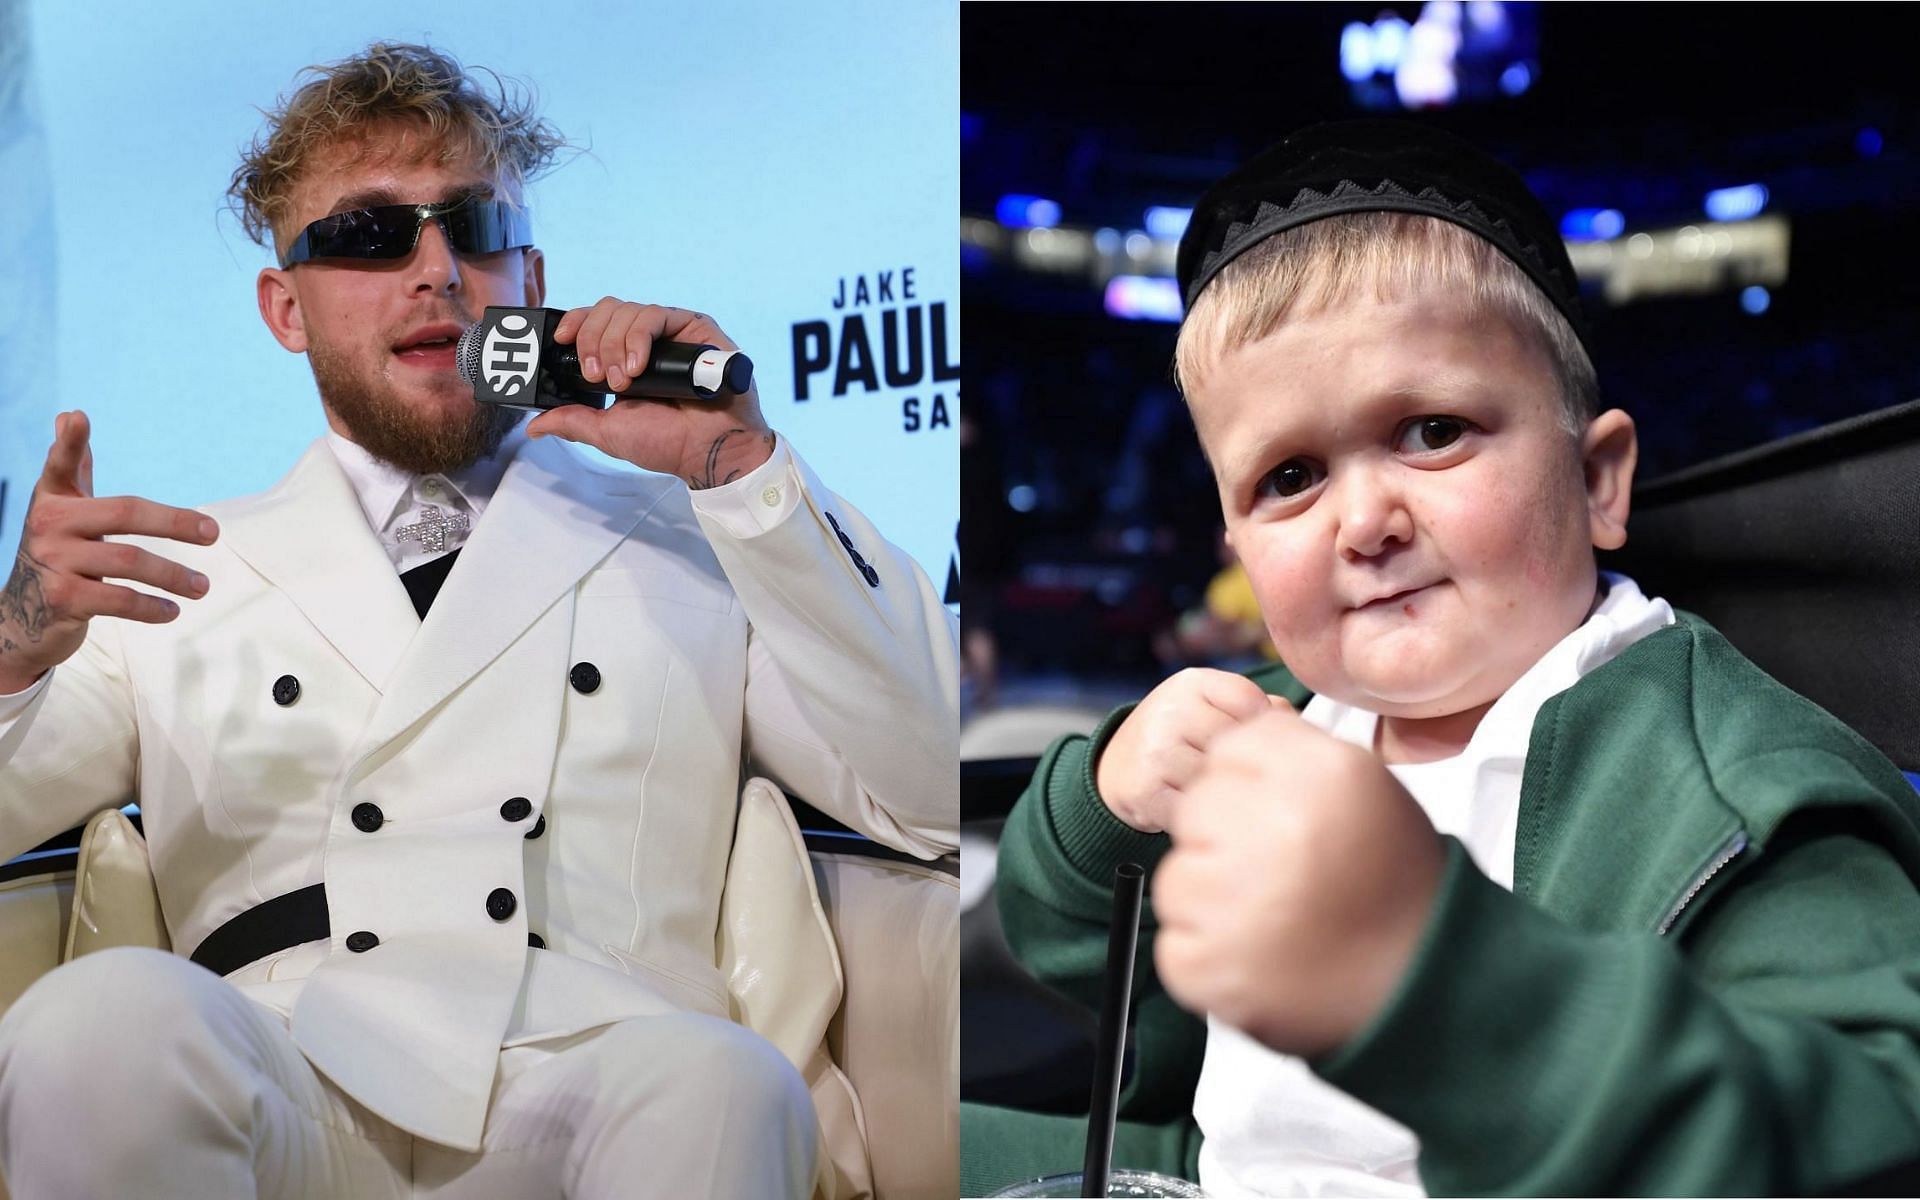 Jake Paul (left); Hasbulla Magomedov (right). [Image source: Getty Images]